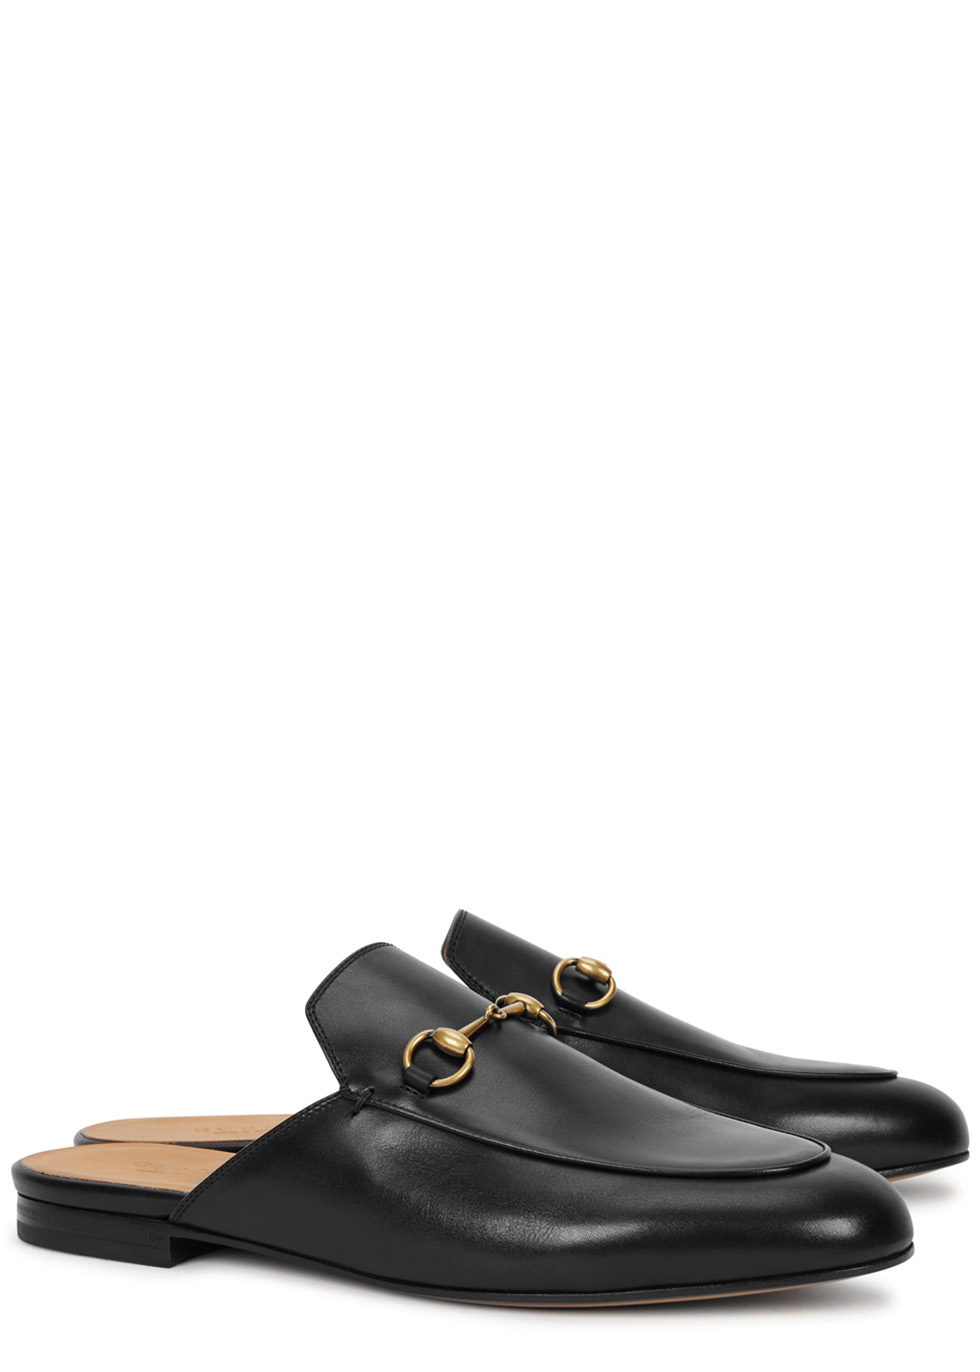 all black gucci loafers